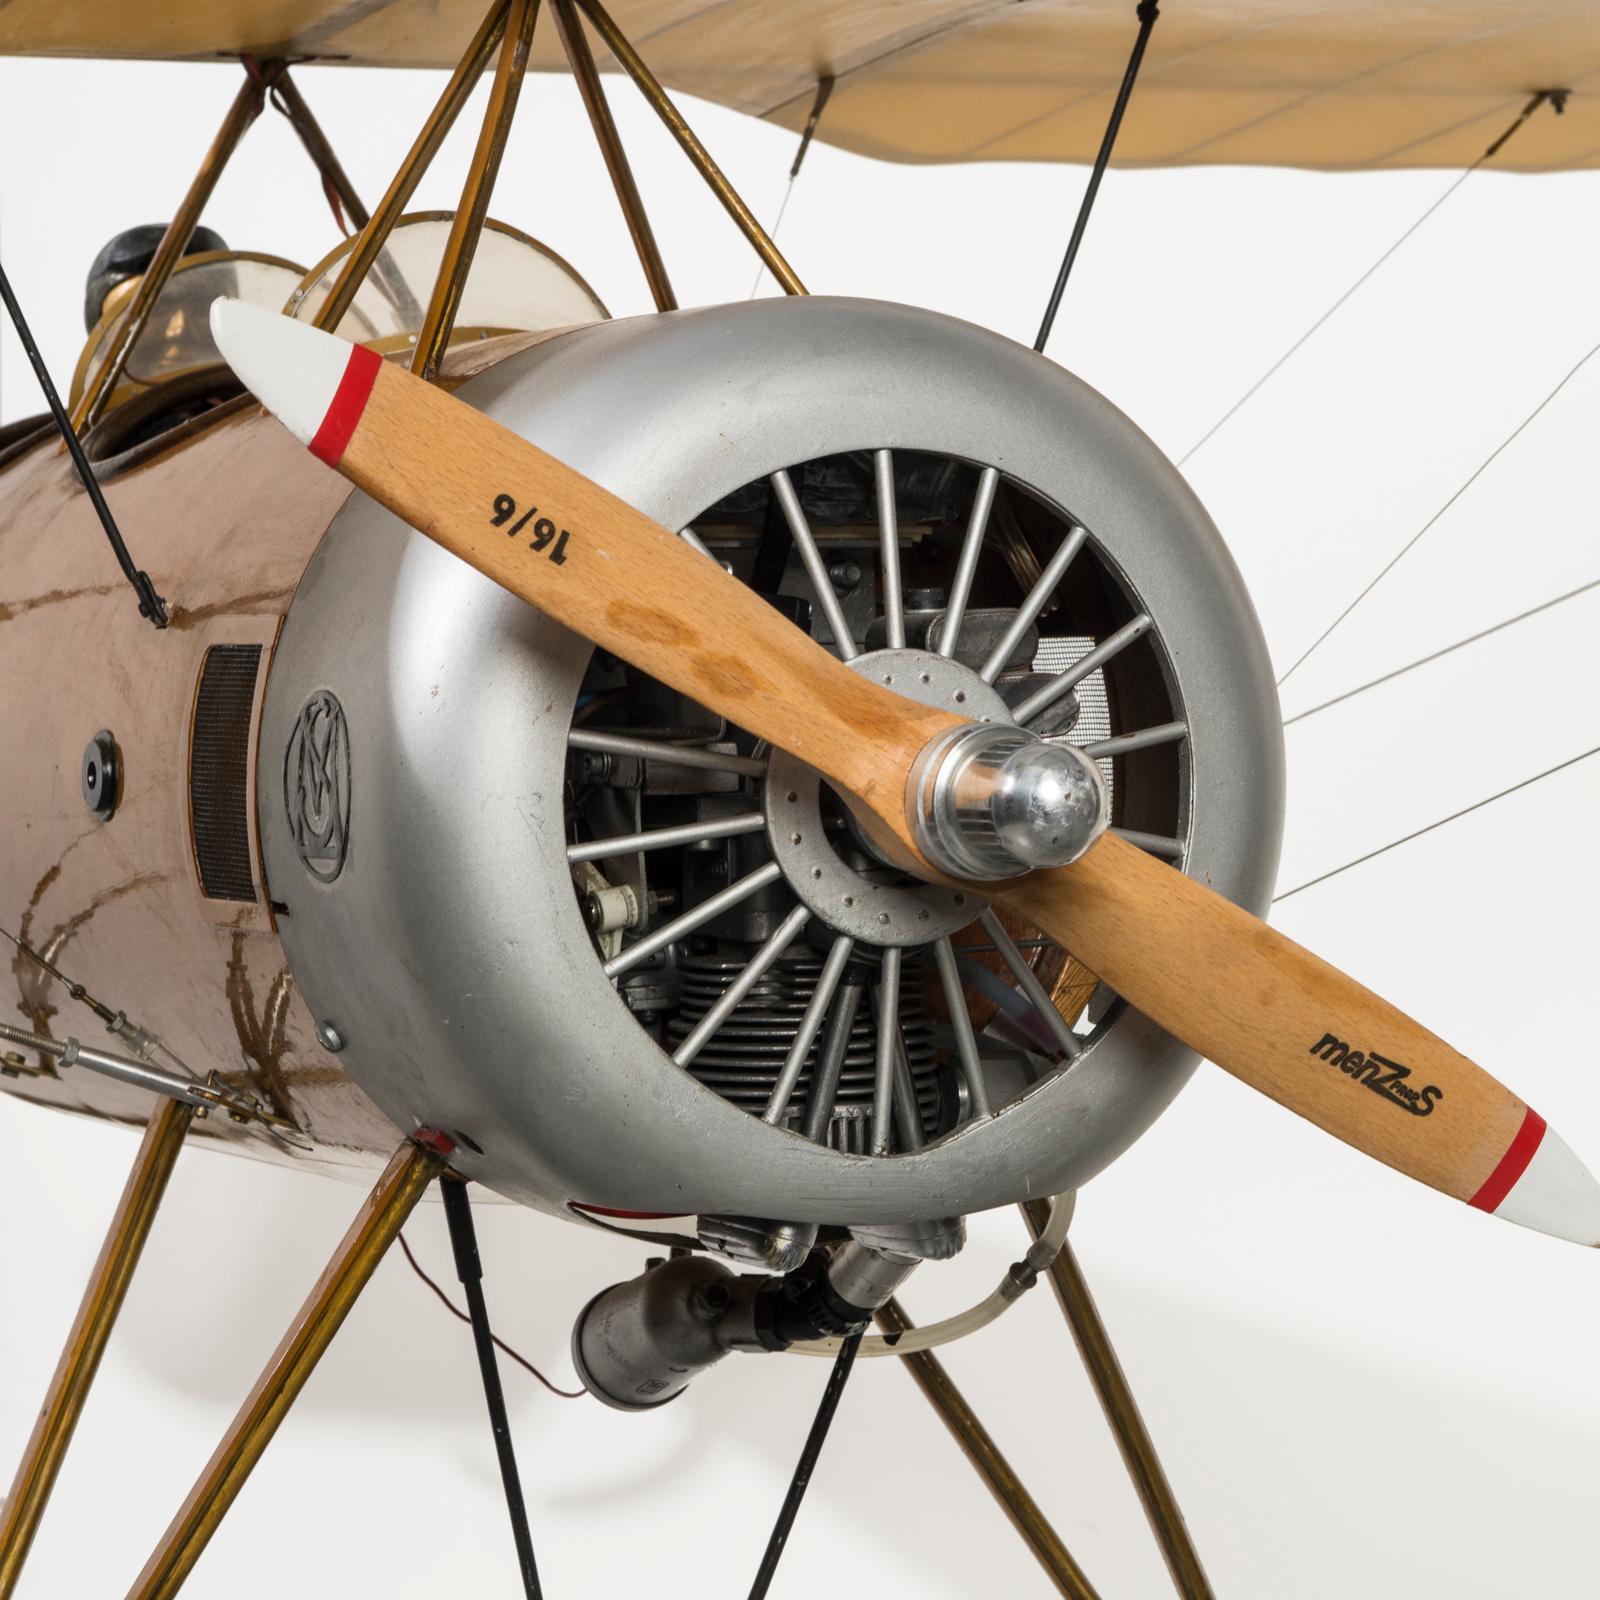 Magnificent large-scale airplane model from the World War I era, complete with a functioning engine. Capture the essence of aviation history and craftsmanship with this stunning vintage hand-built airplane model!

Meticulously handcrafted from